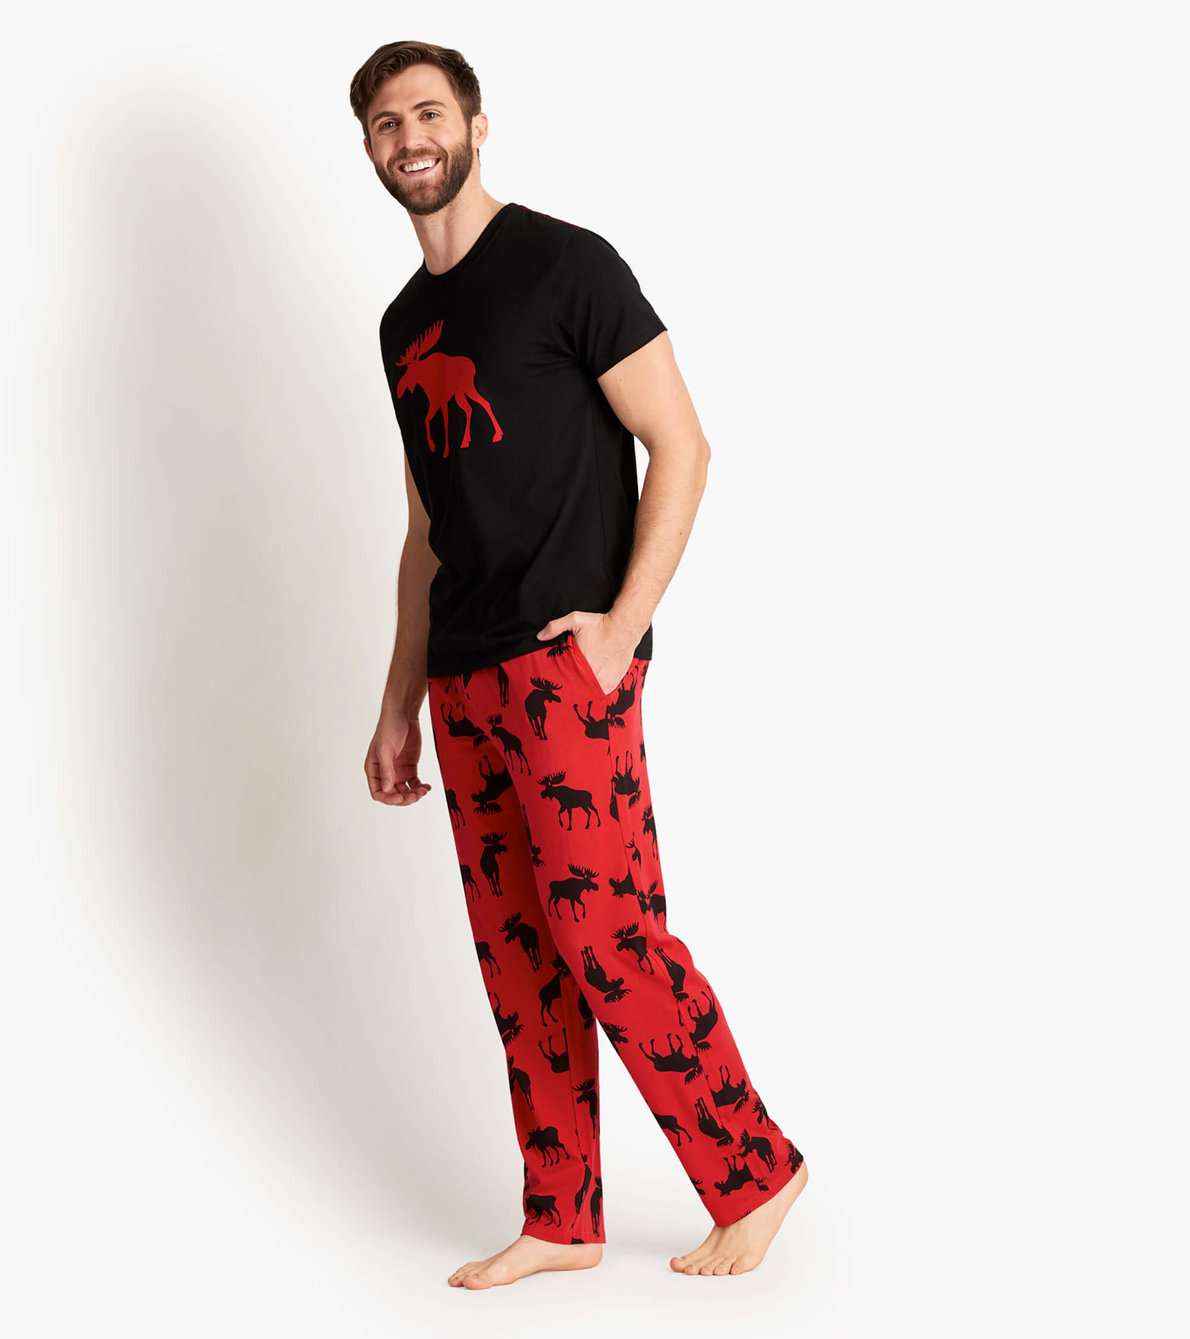 View larger image of Moose On Red Men's Tee and Pants Pajama Separates